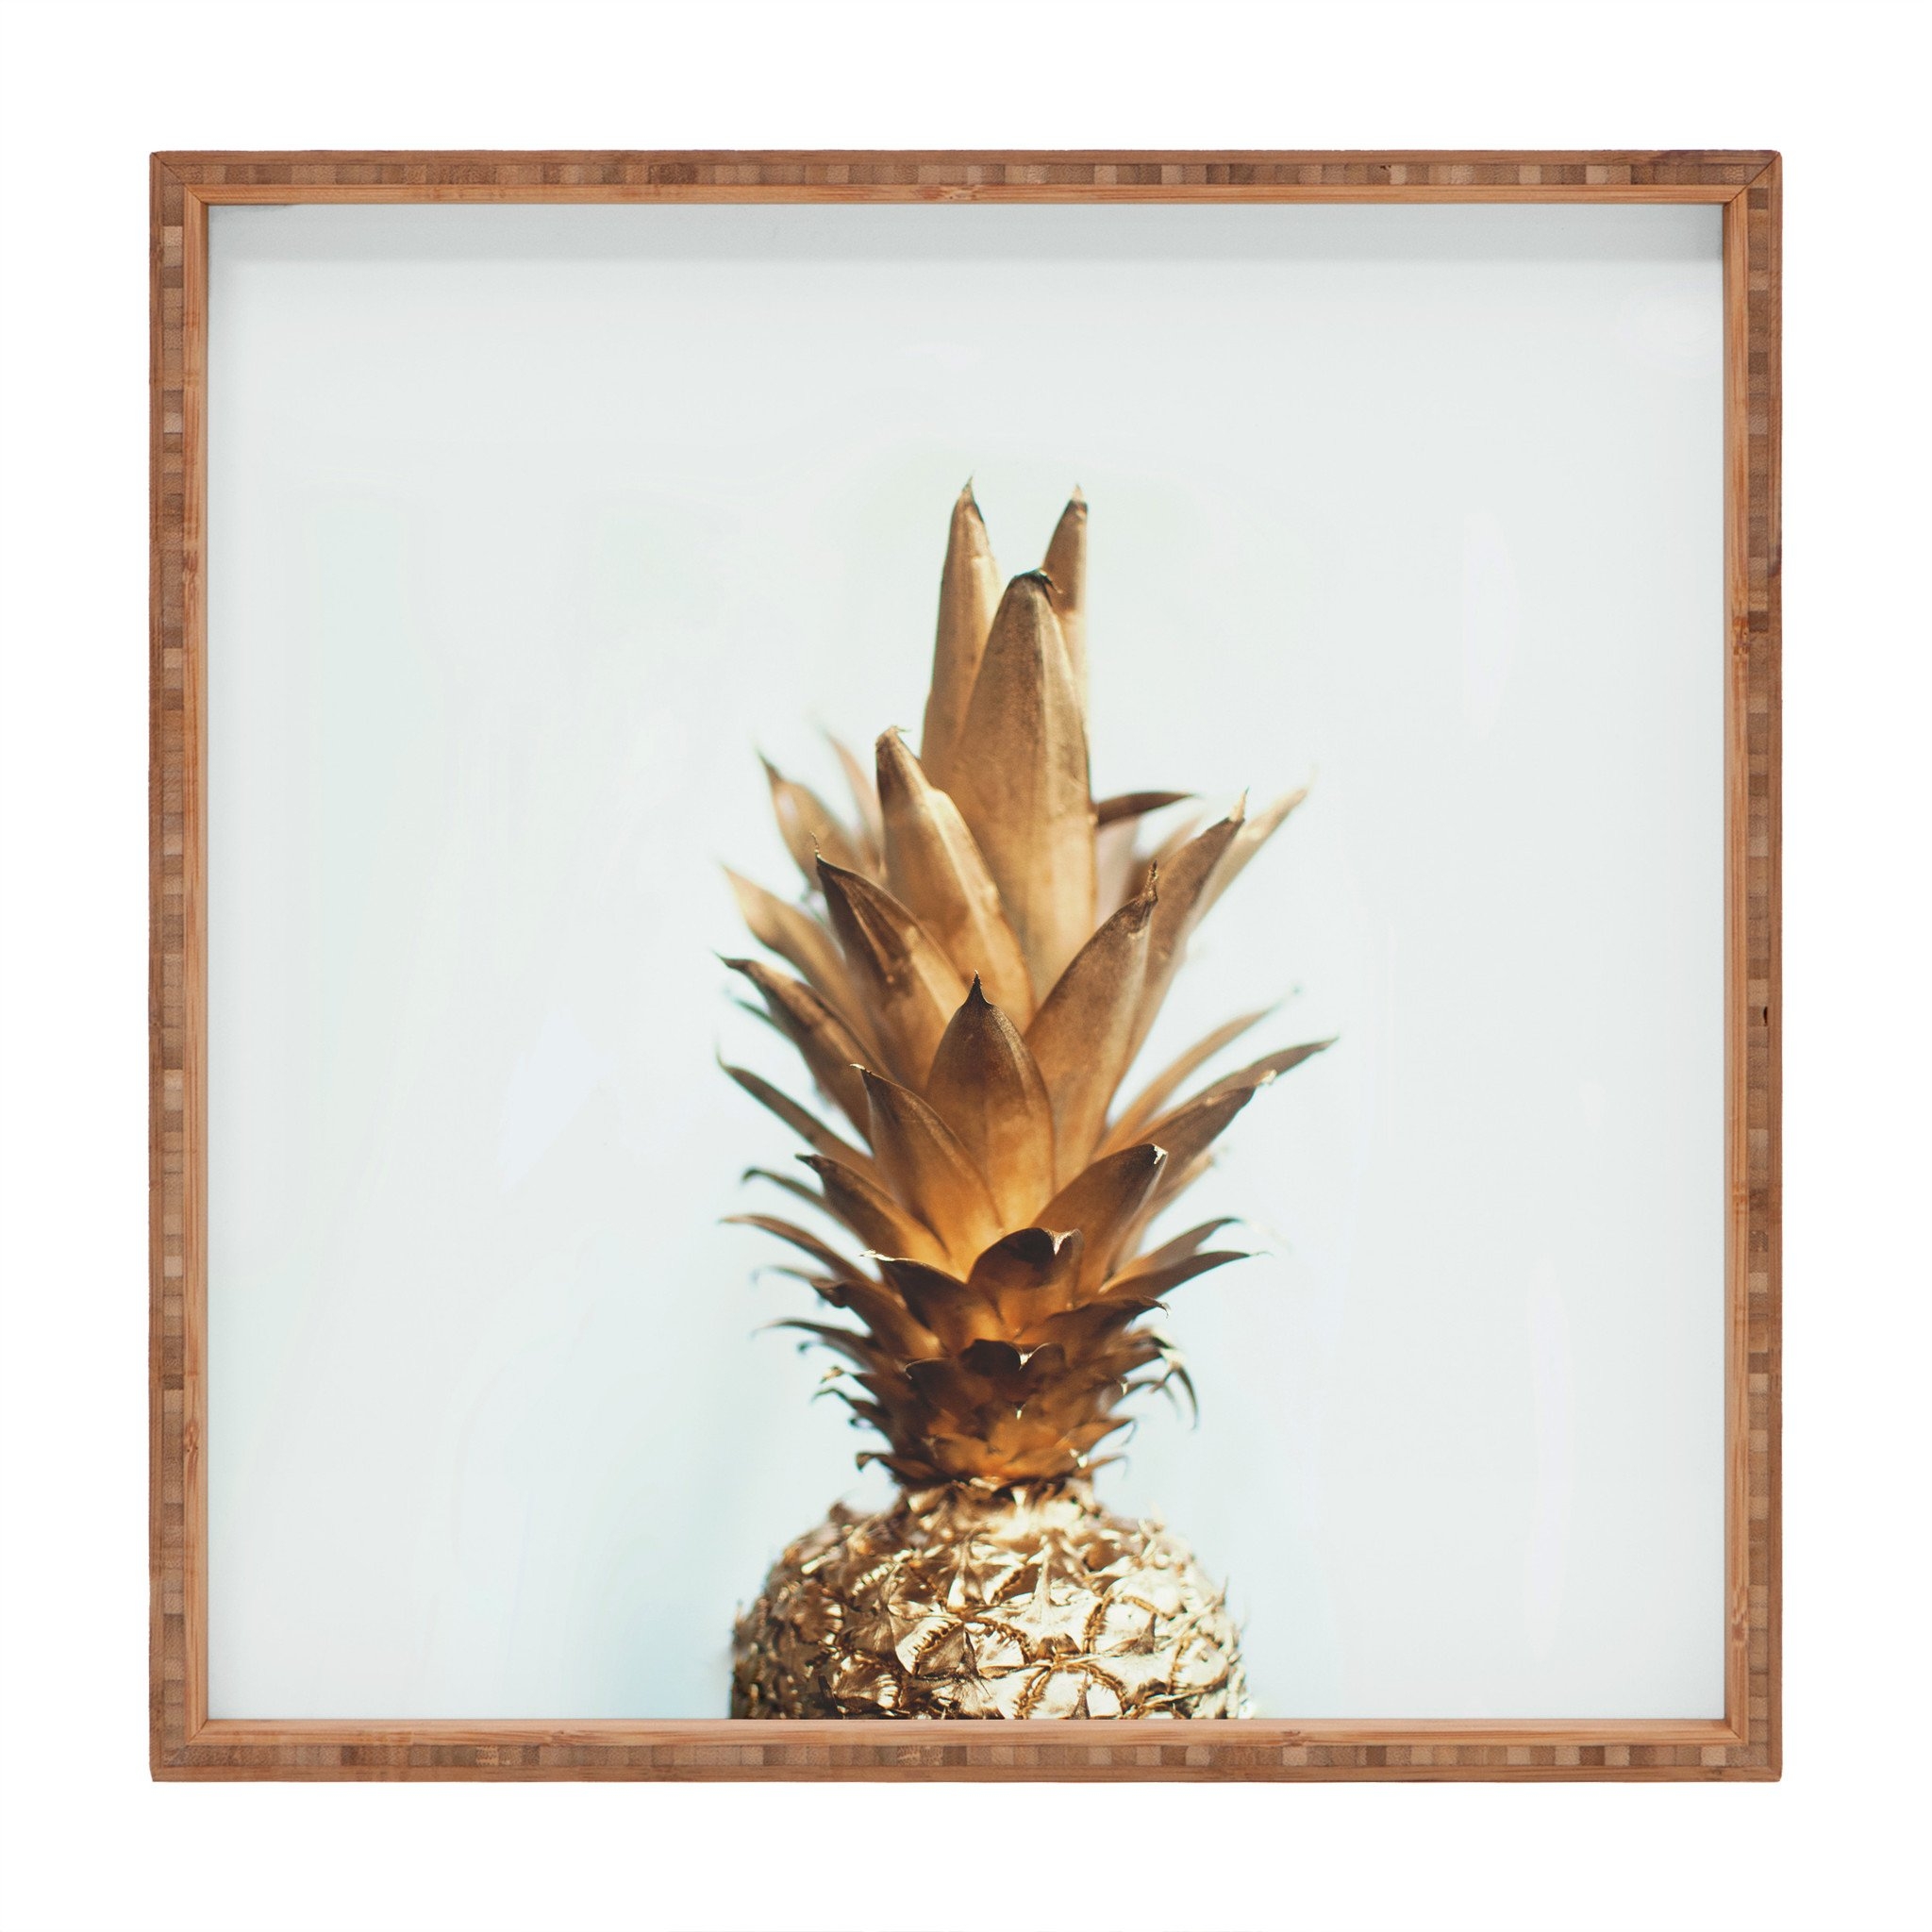 Chelsea Victoria The Gold Pineapple Square Tray - M - Image 0